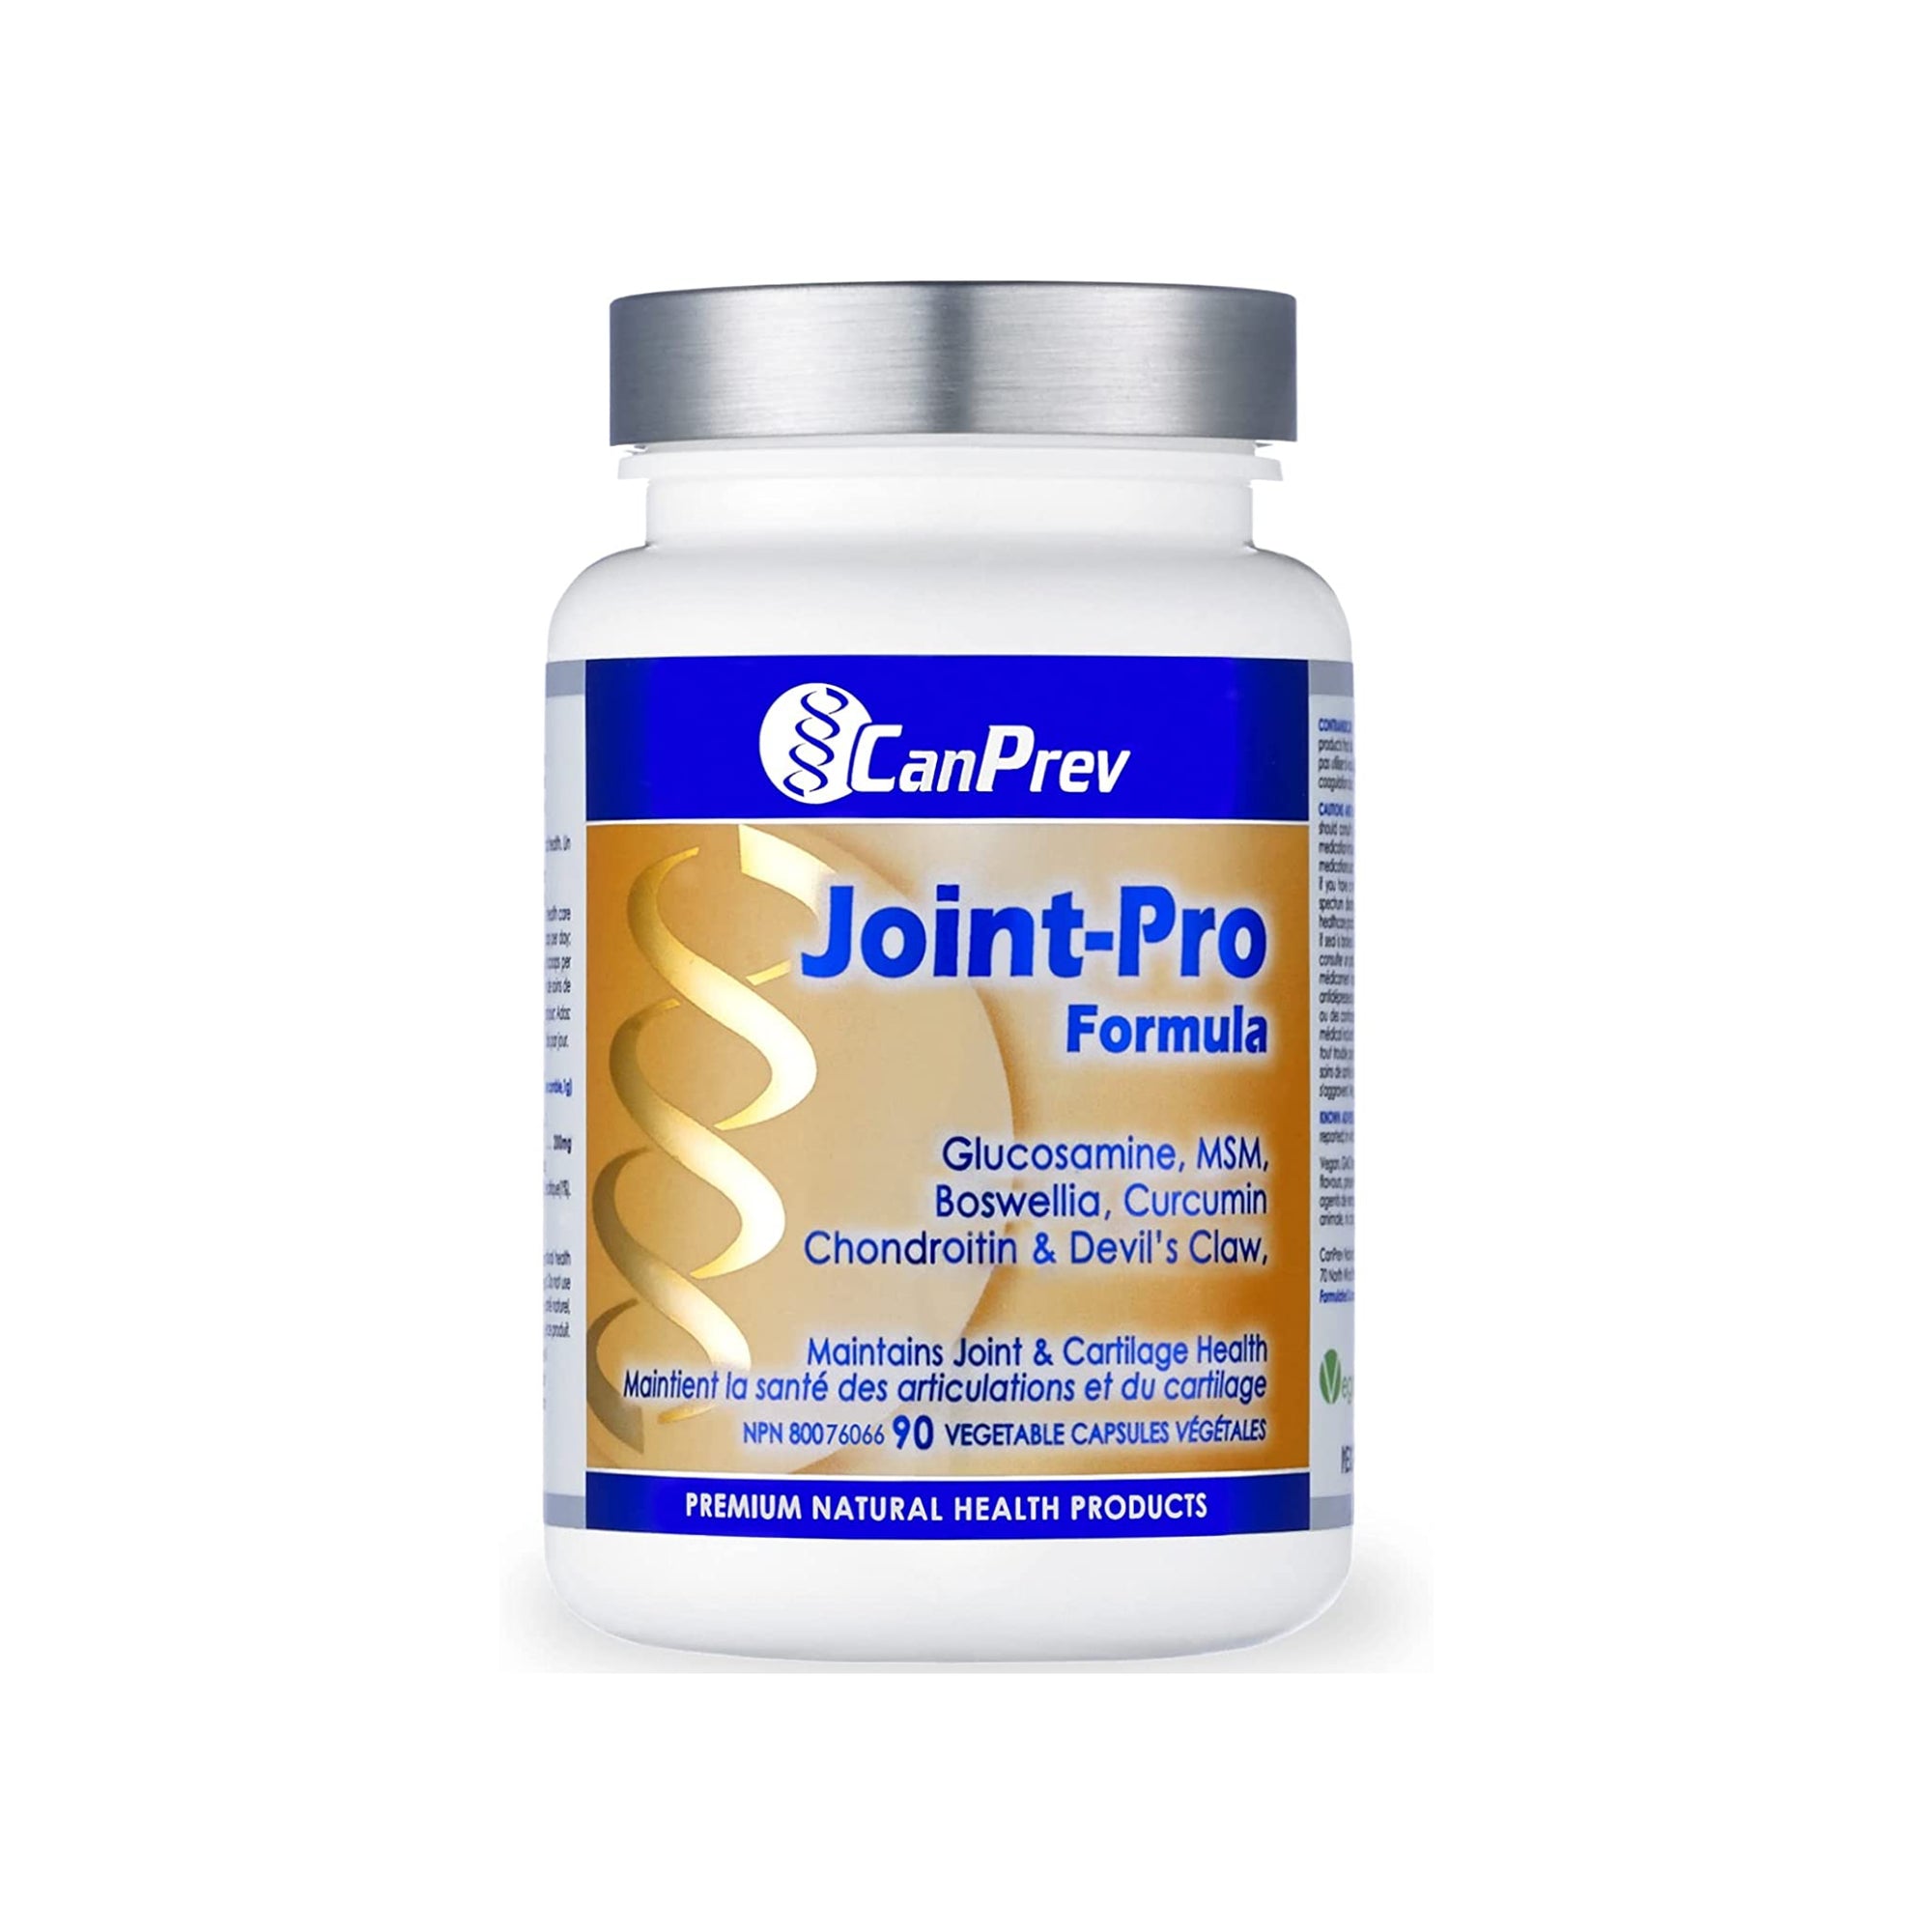 CanPrev Joint-Pro 90s